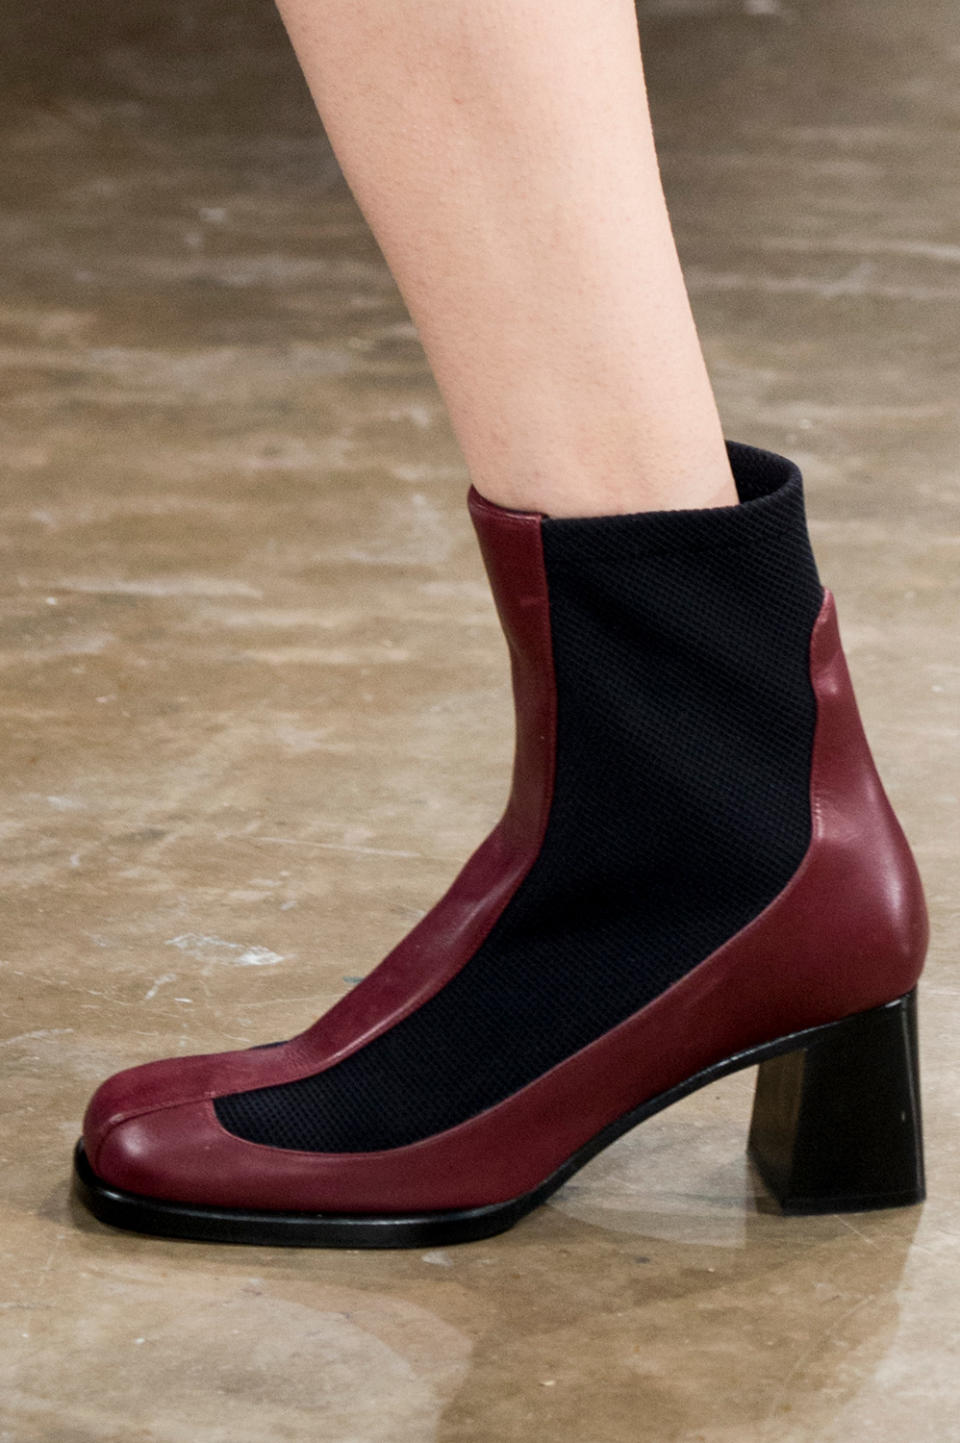 Burgundy and Black Exaggerated Chelsea Boot, Versus Versace Fall/Winter 2017